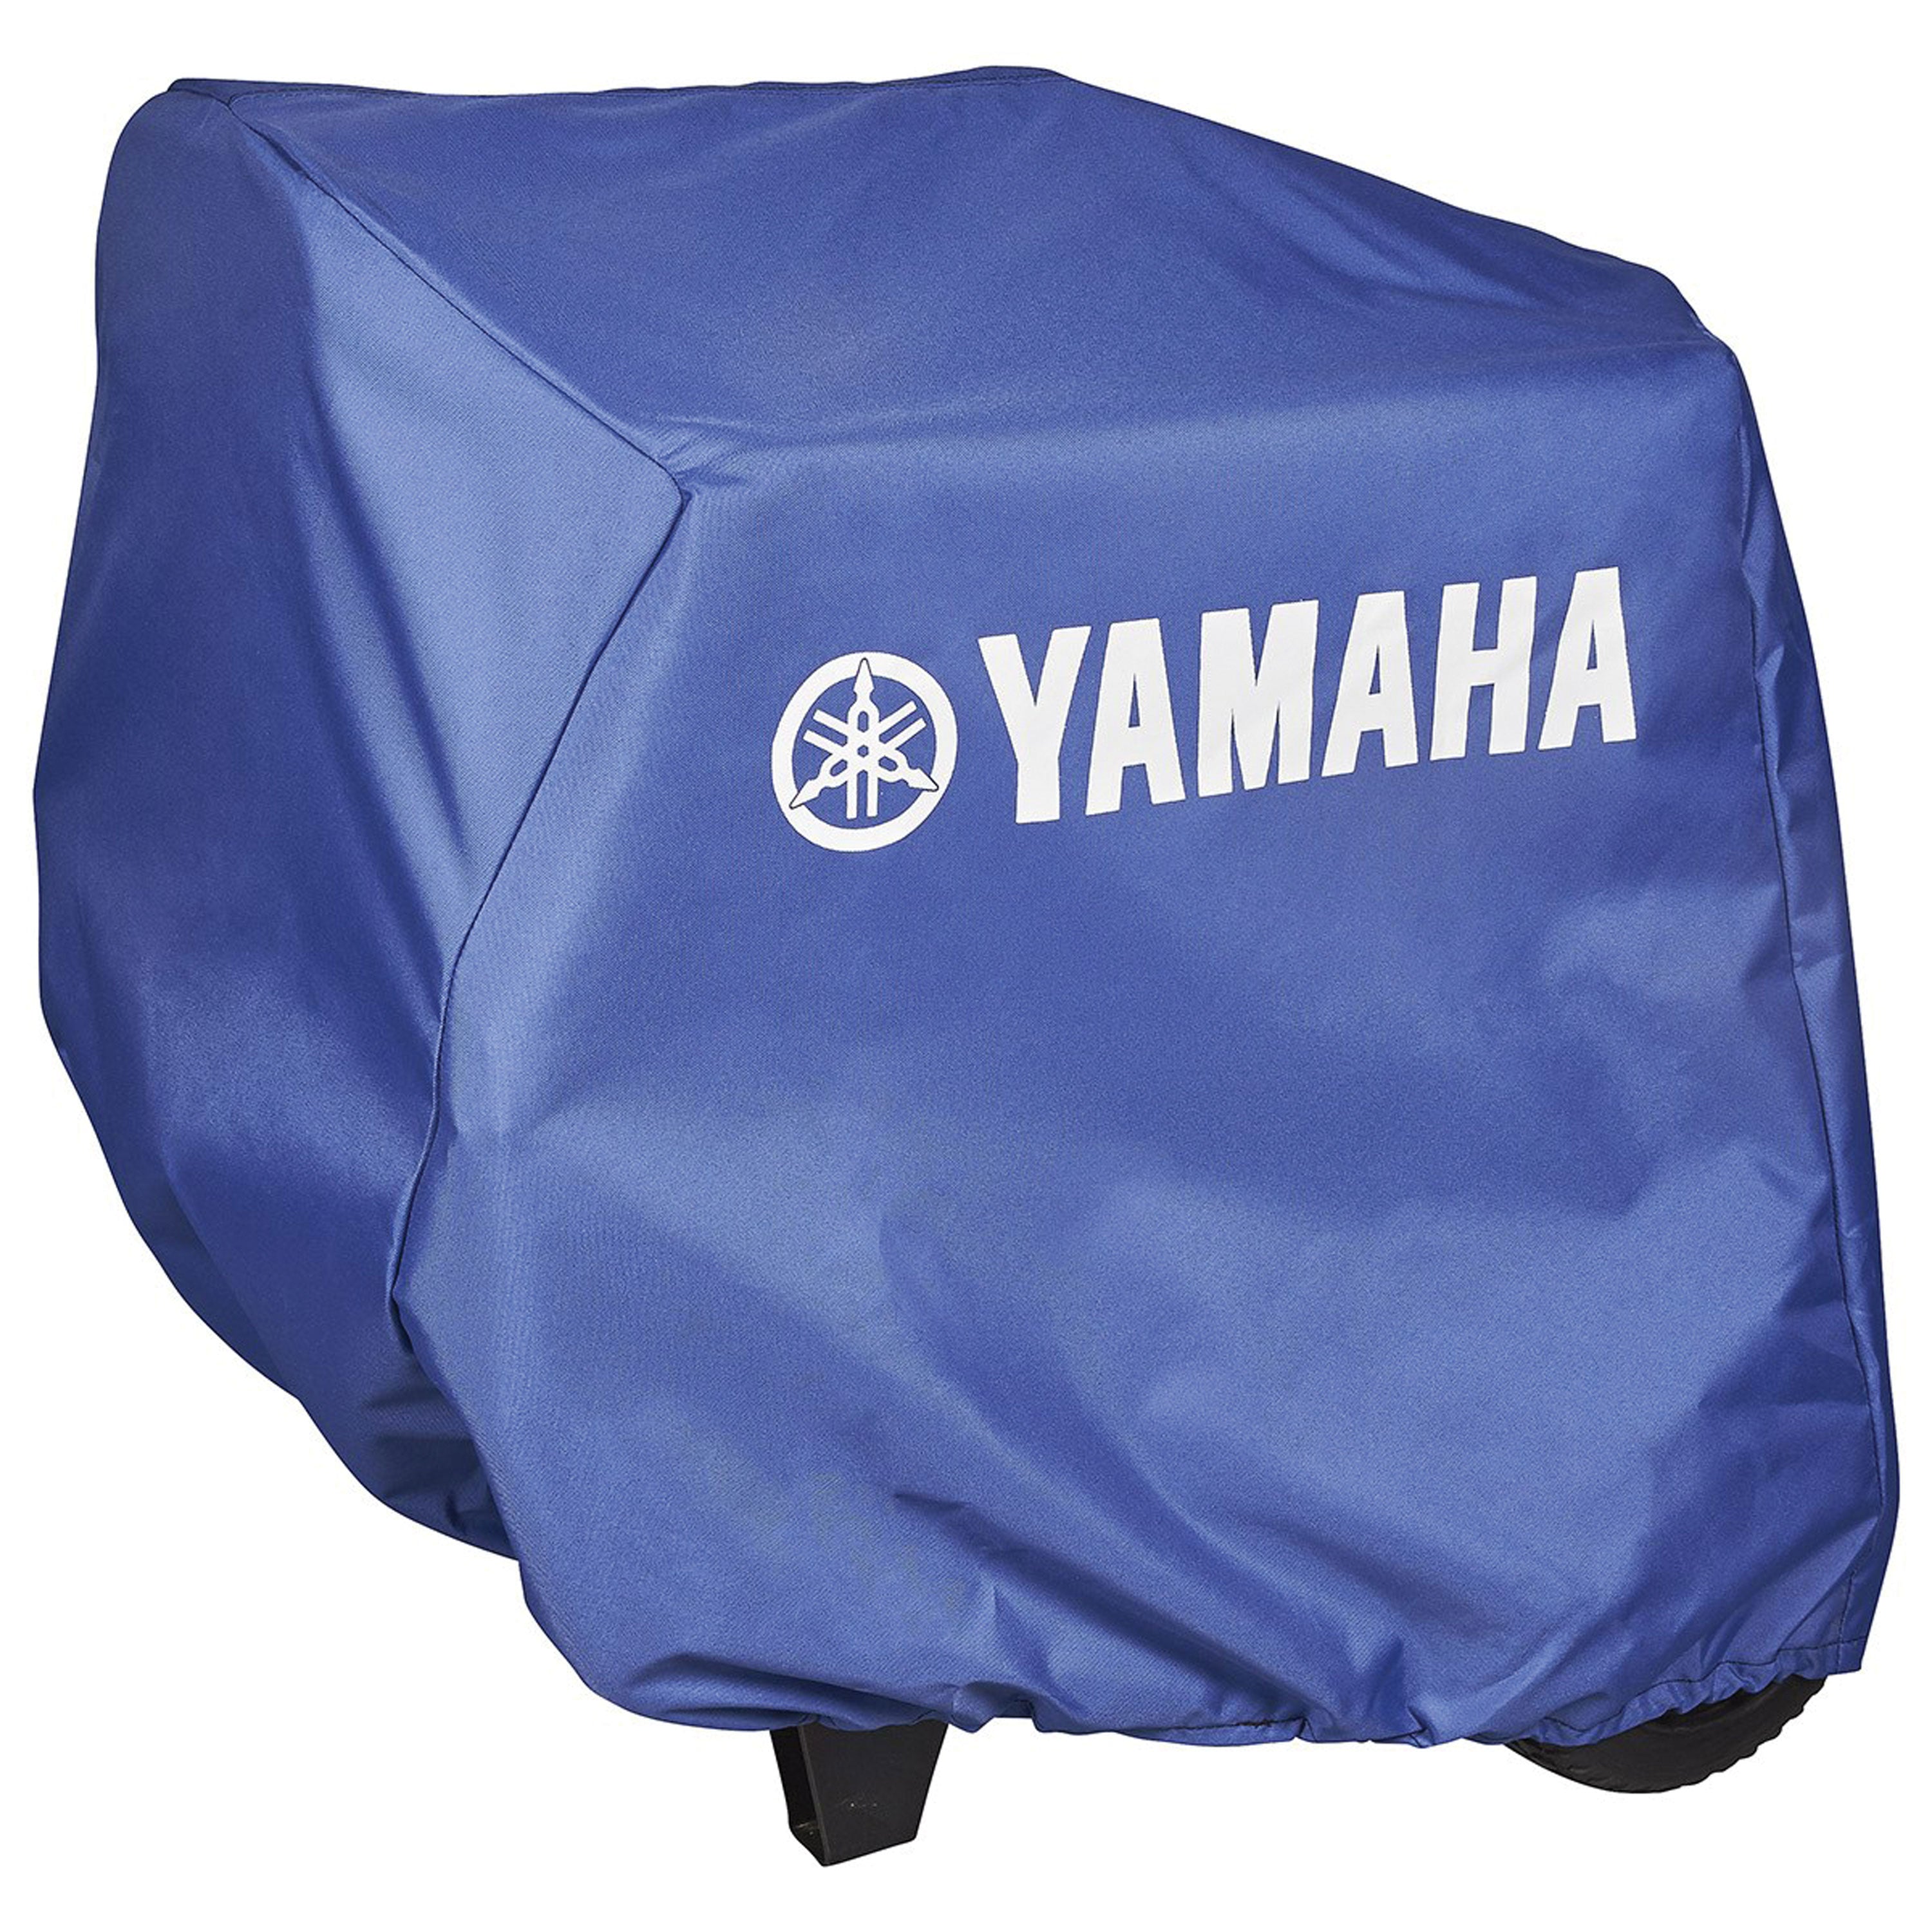 Yamaha ACC-PWCVR-30-00 Pressure Washer Cover - PW3028, Blue